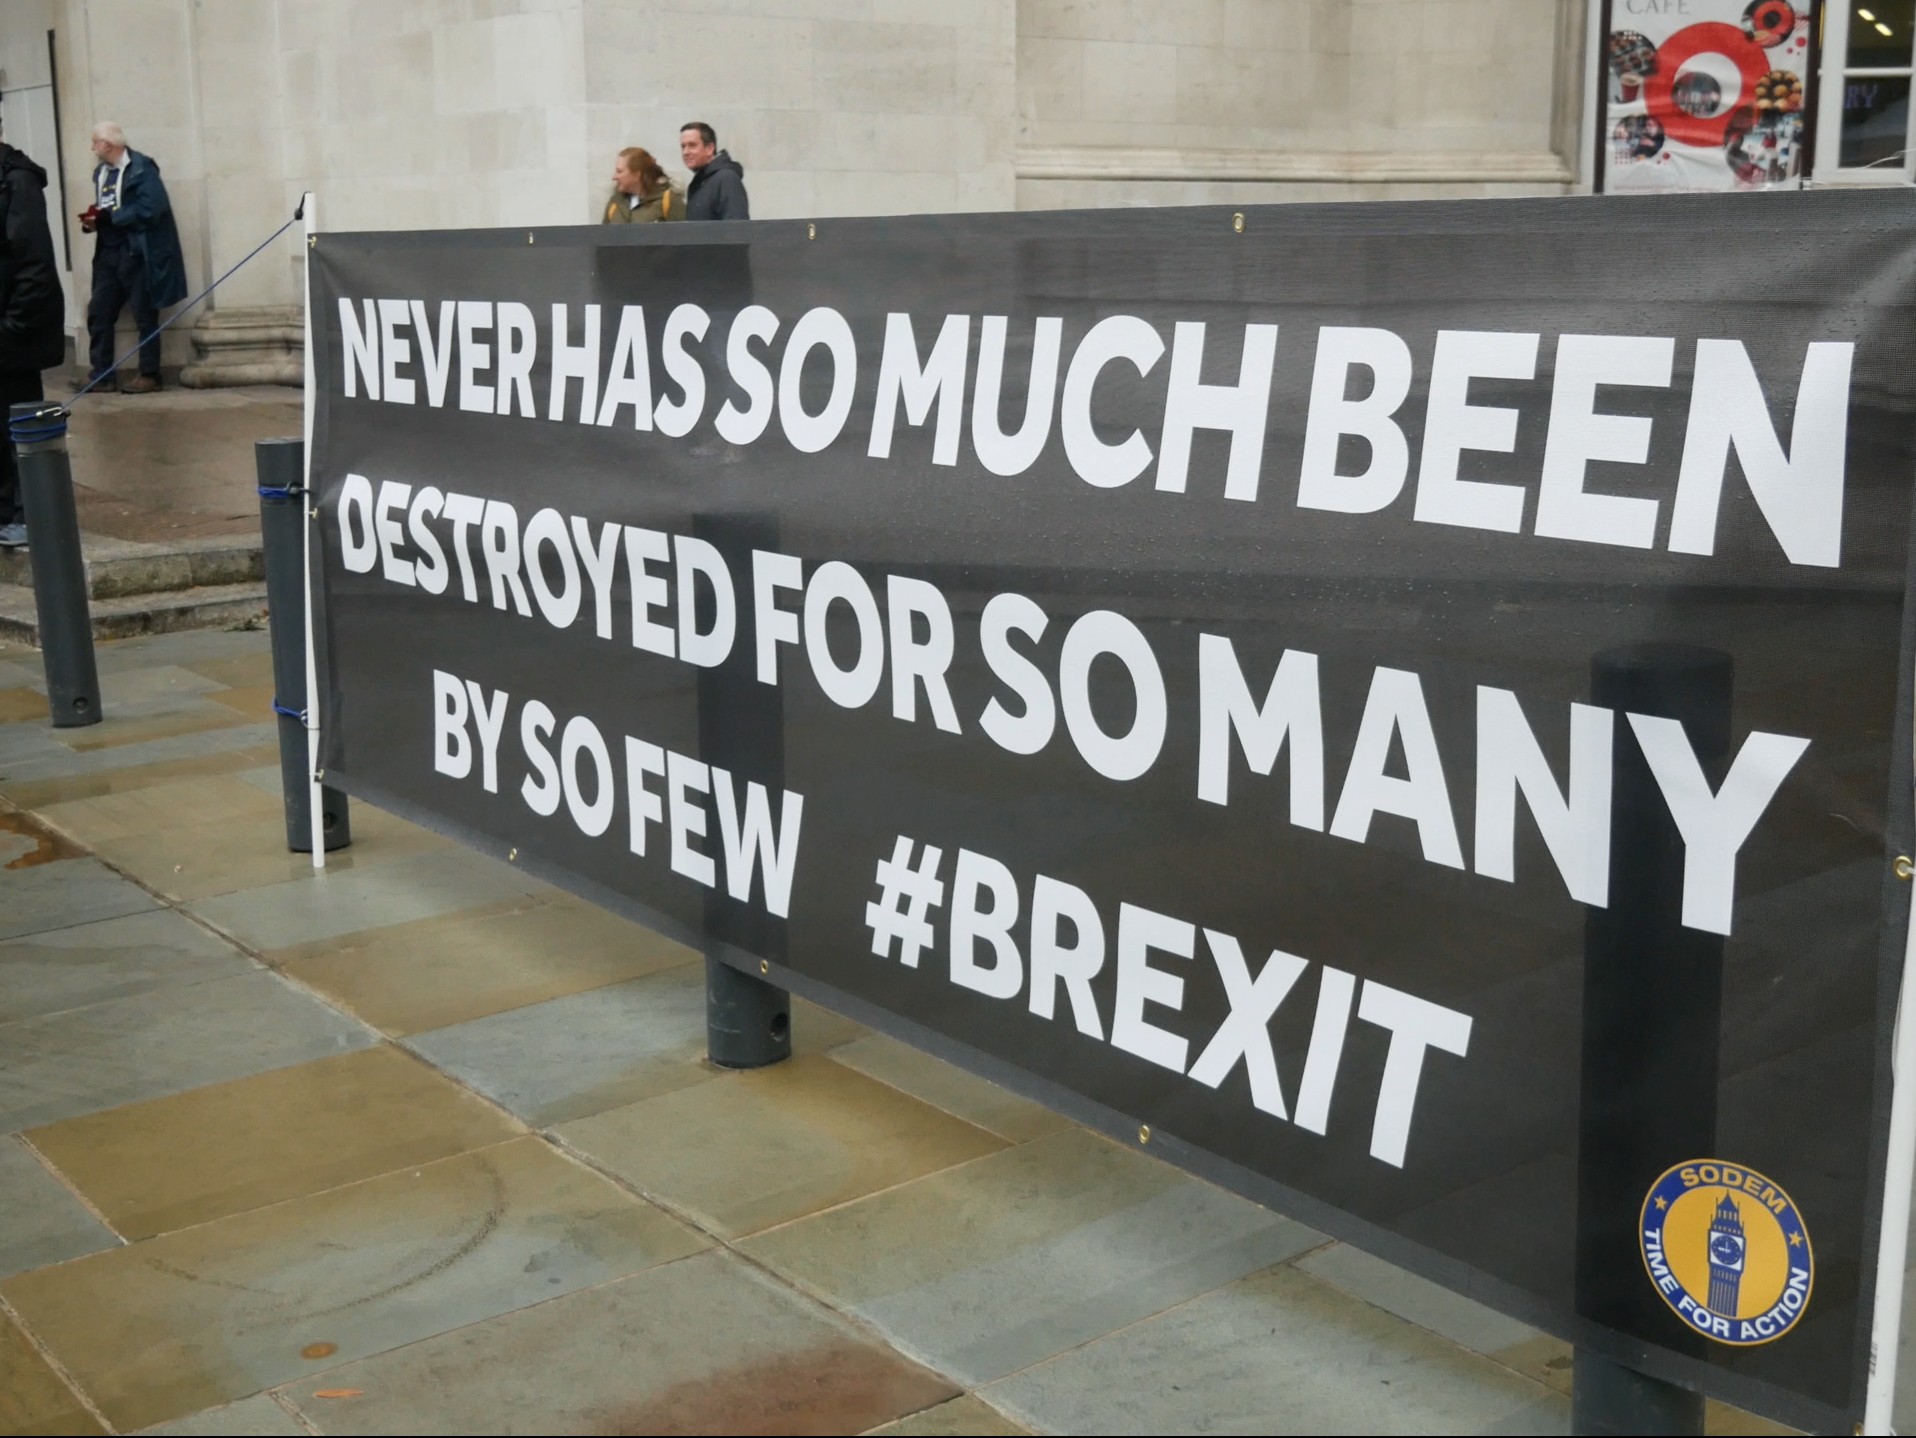 Anti-Brexit protest in Manchester, England ahead of the Conservative Party Conference. October 2, 2021. Kurt Zindulka, Breitbart News